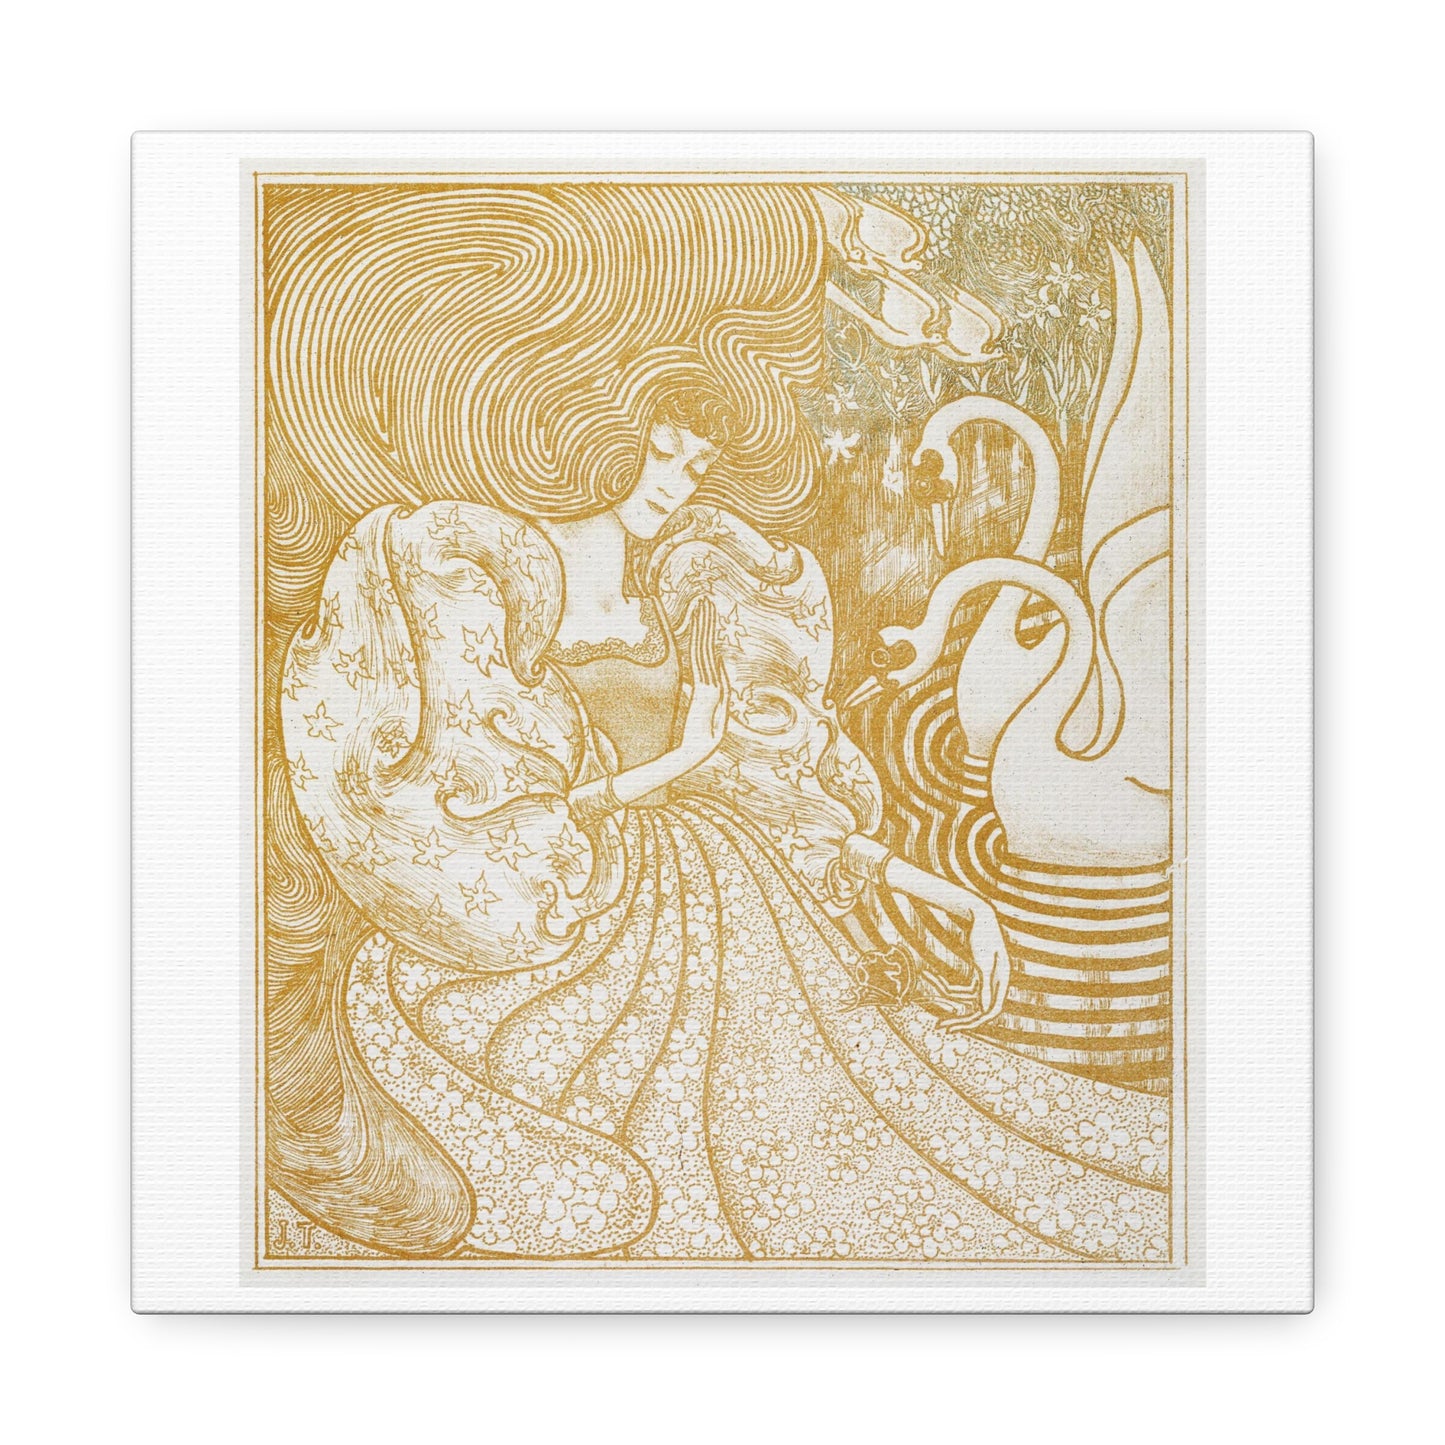 Woman with a Butterfly at a Pond with Two Swans (1894) by Jan Toorop, from the Original, Print on Canvas